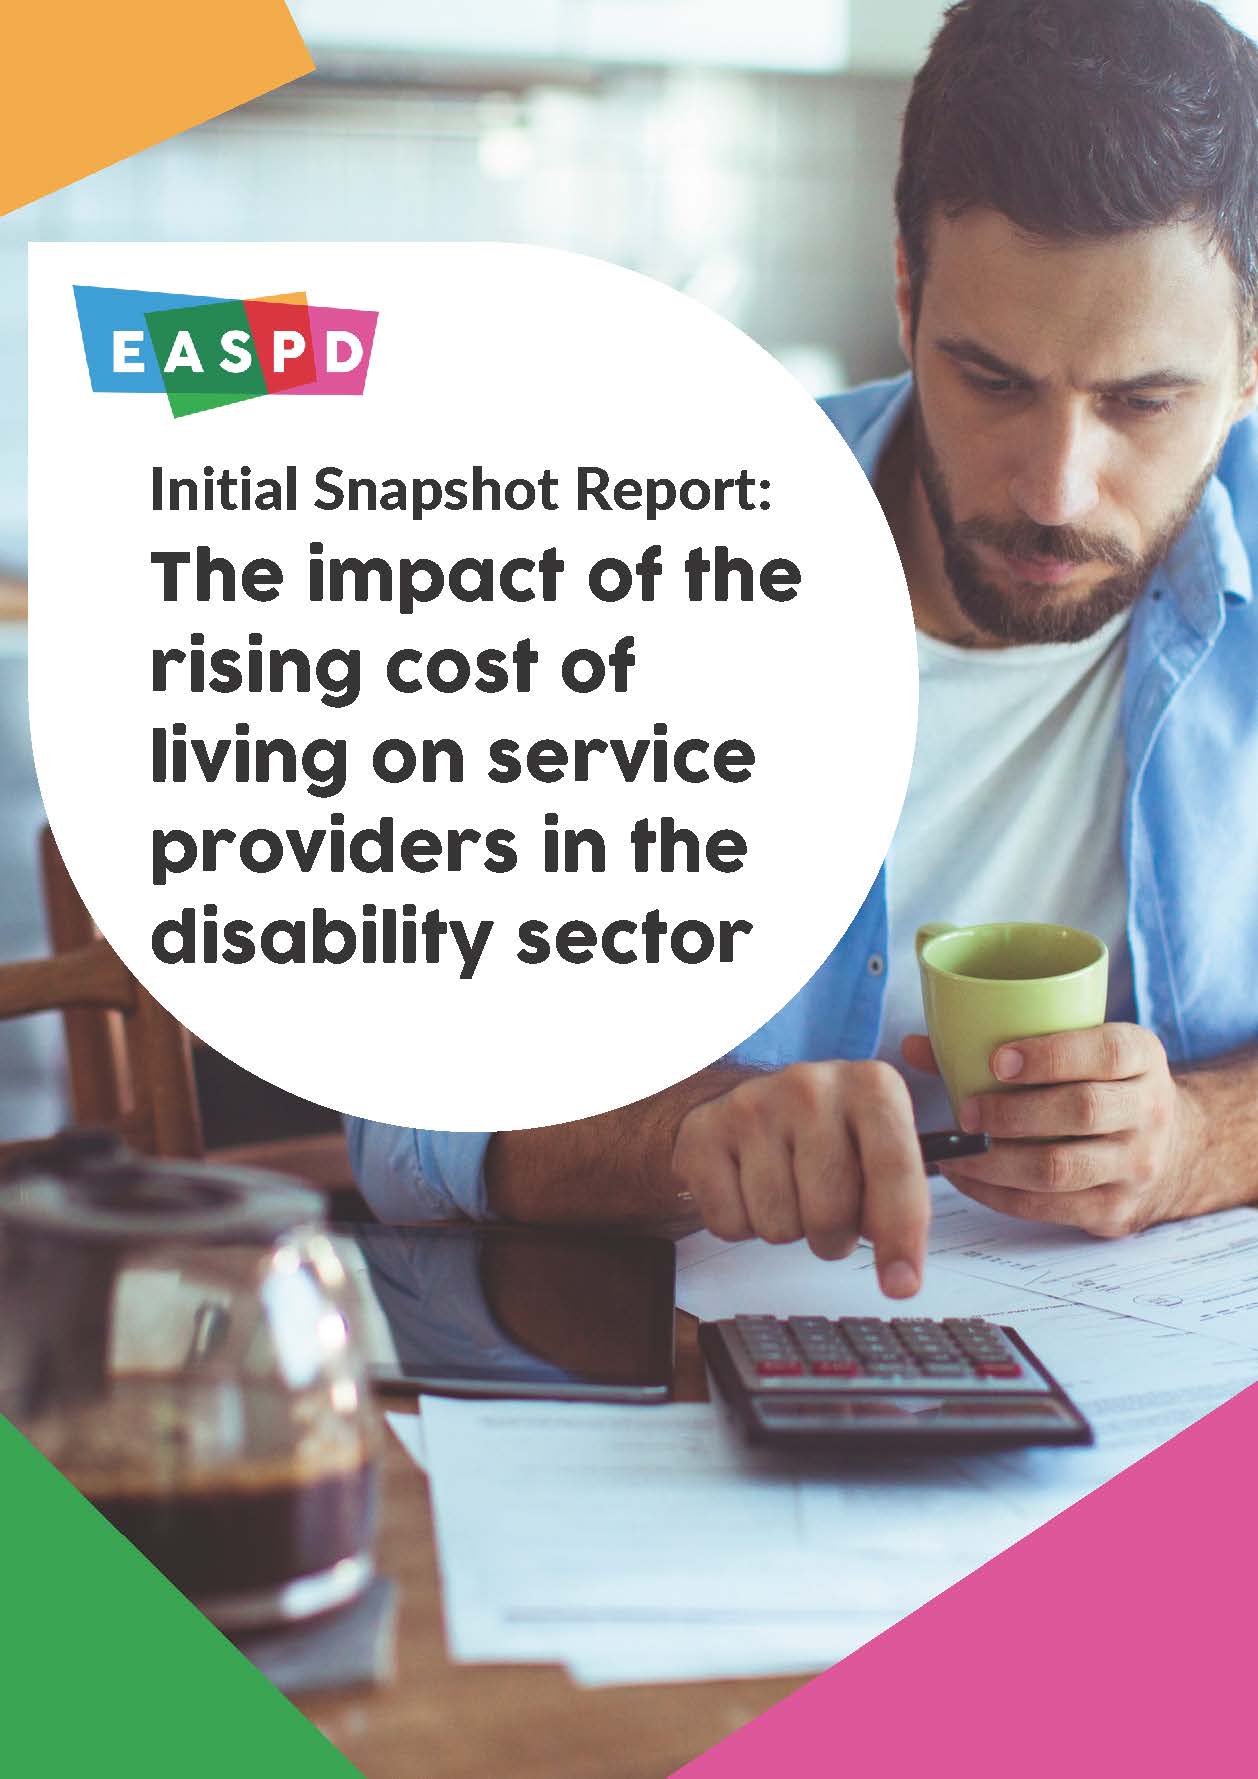 https://www.apsscr.cz/media/aktuality/easpd-initial-snapshot-report-on-the-rising-cost-of-living-on-service-providers-in-the-disability-sector.jpg